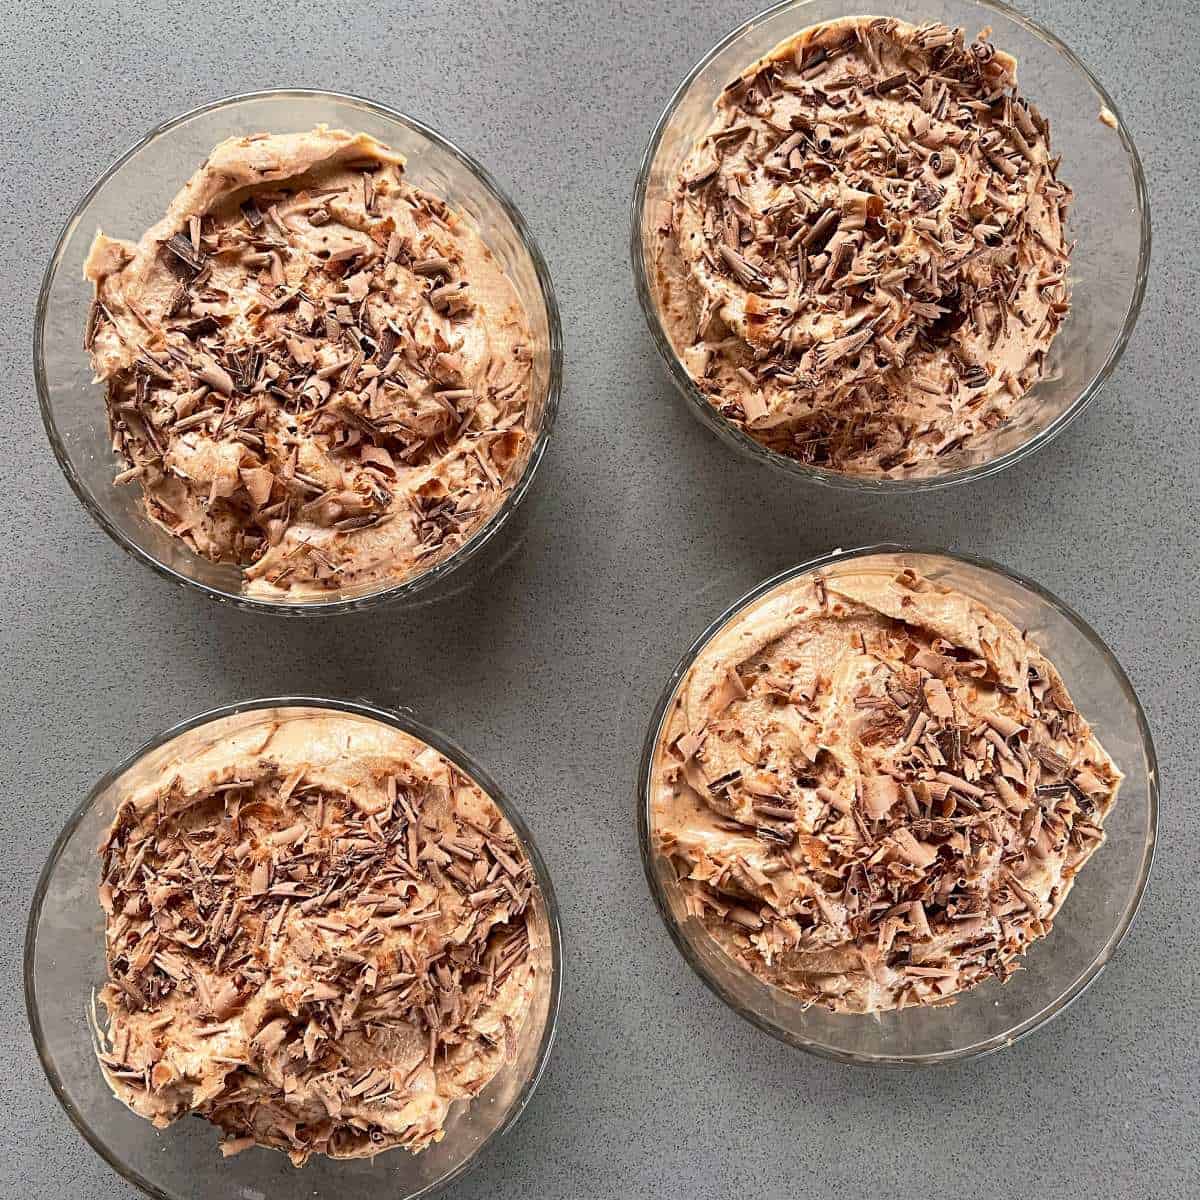 Chocolate mousse with grated chocolate on top in glass bowls on a grey bench.